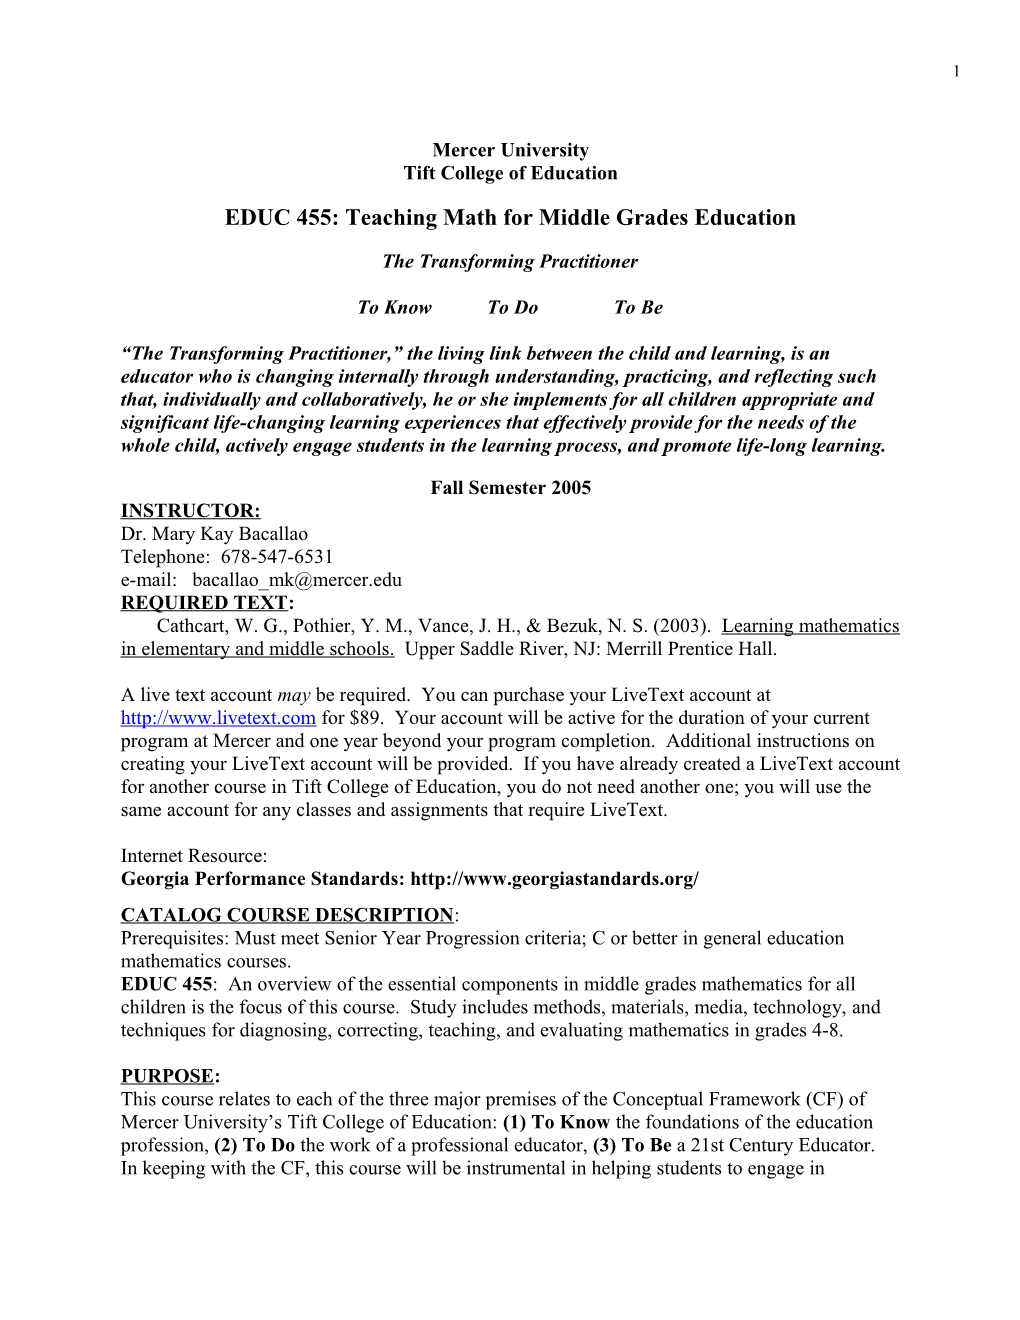 EDUC 455: Teaching Math for Middle Grades Education